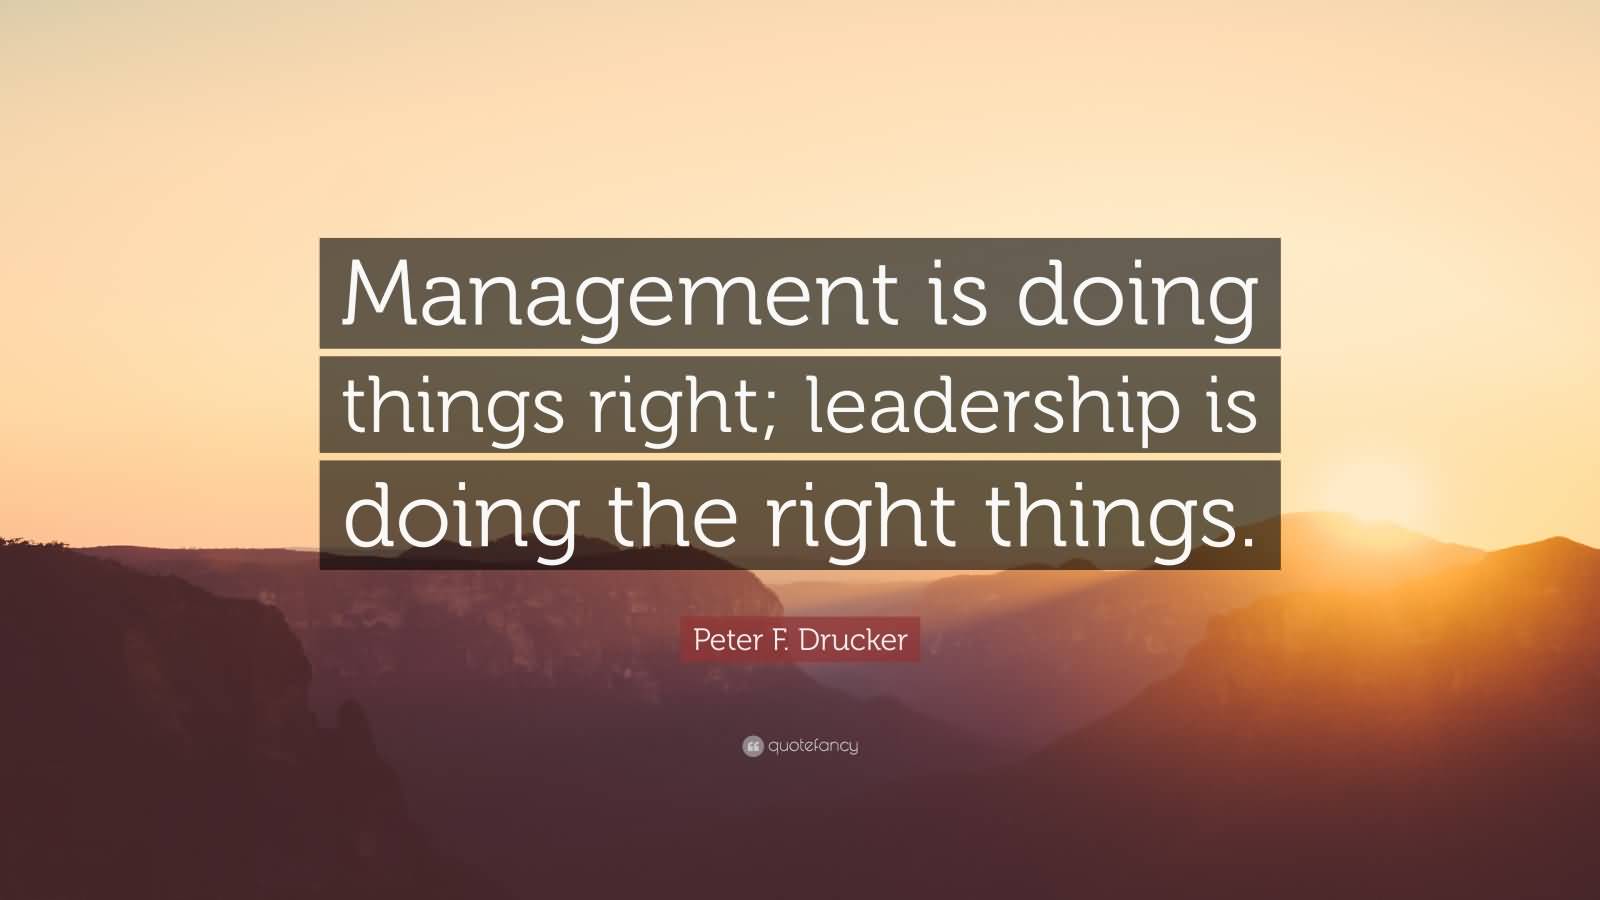 Management is doing things right; leadership is doing the right things. Peter F. Drucker